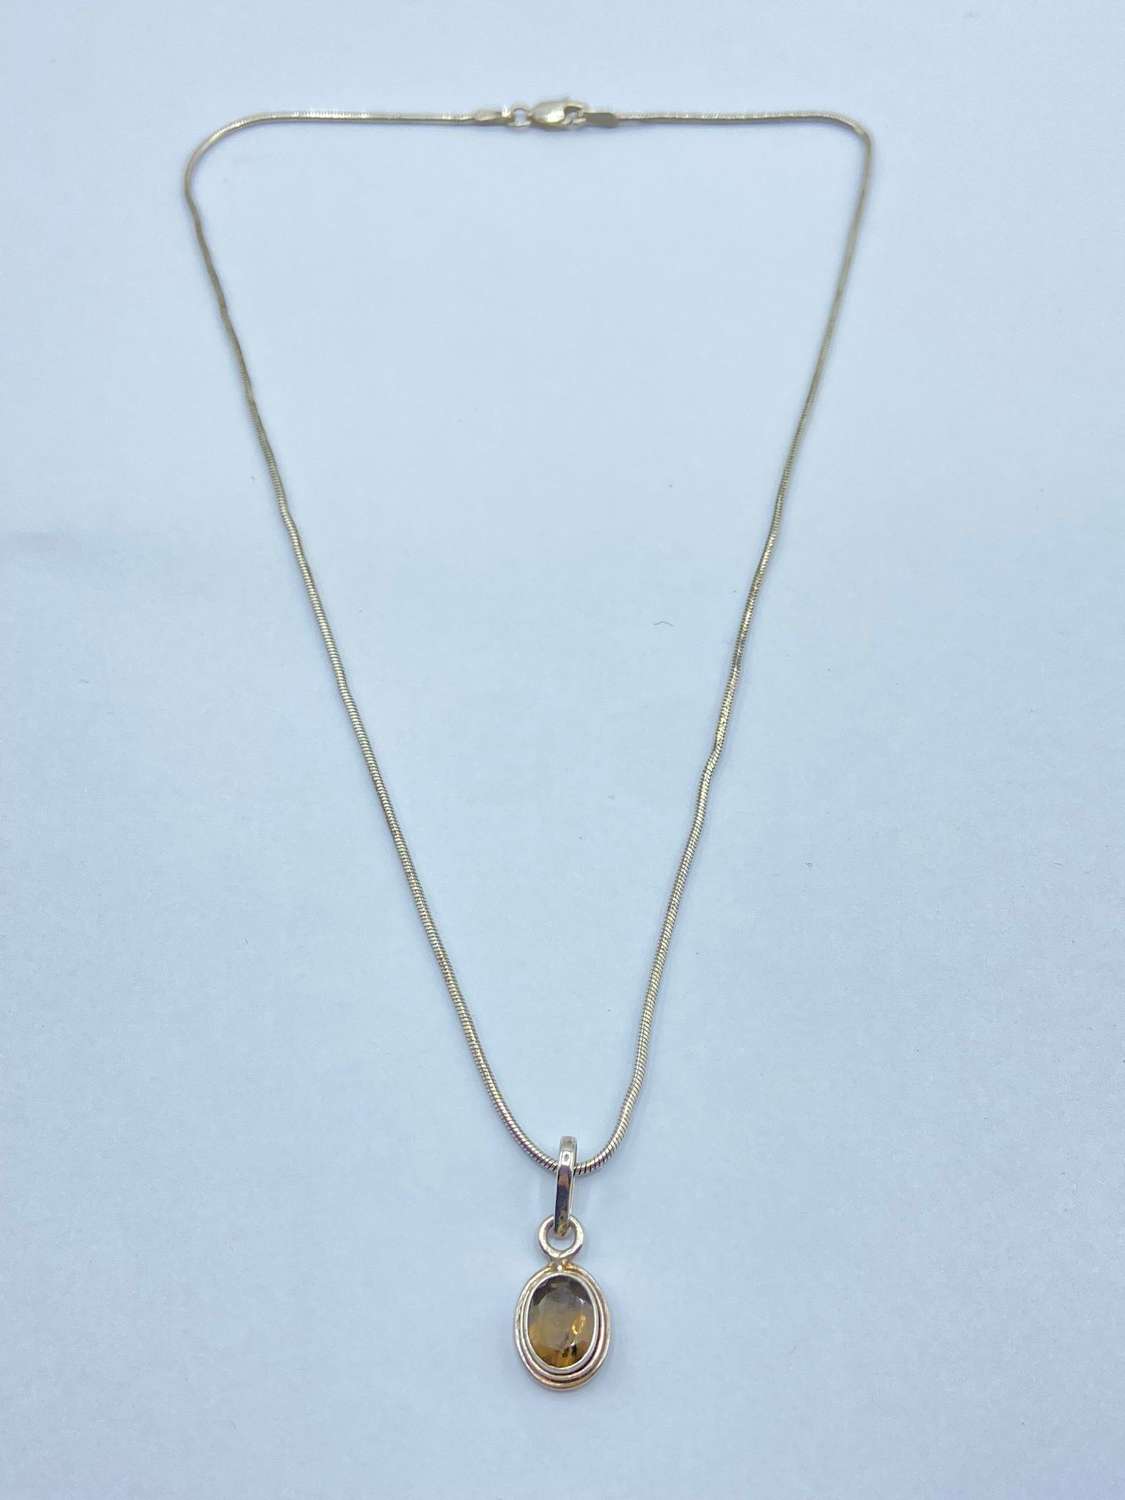 Beautiful Vintage Sterling Silver & Faceted Smoked Quartz Necklace